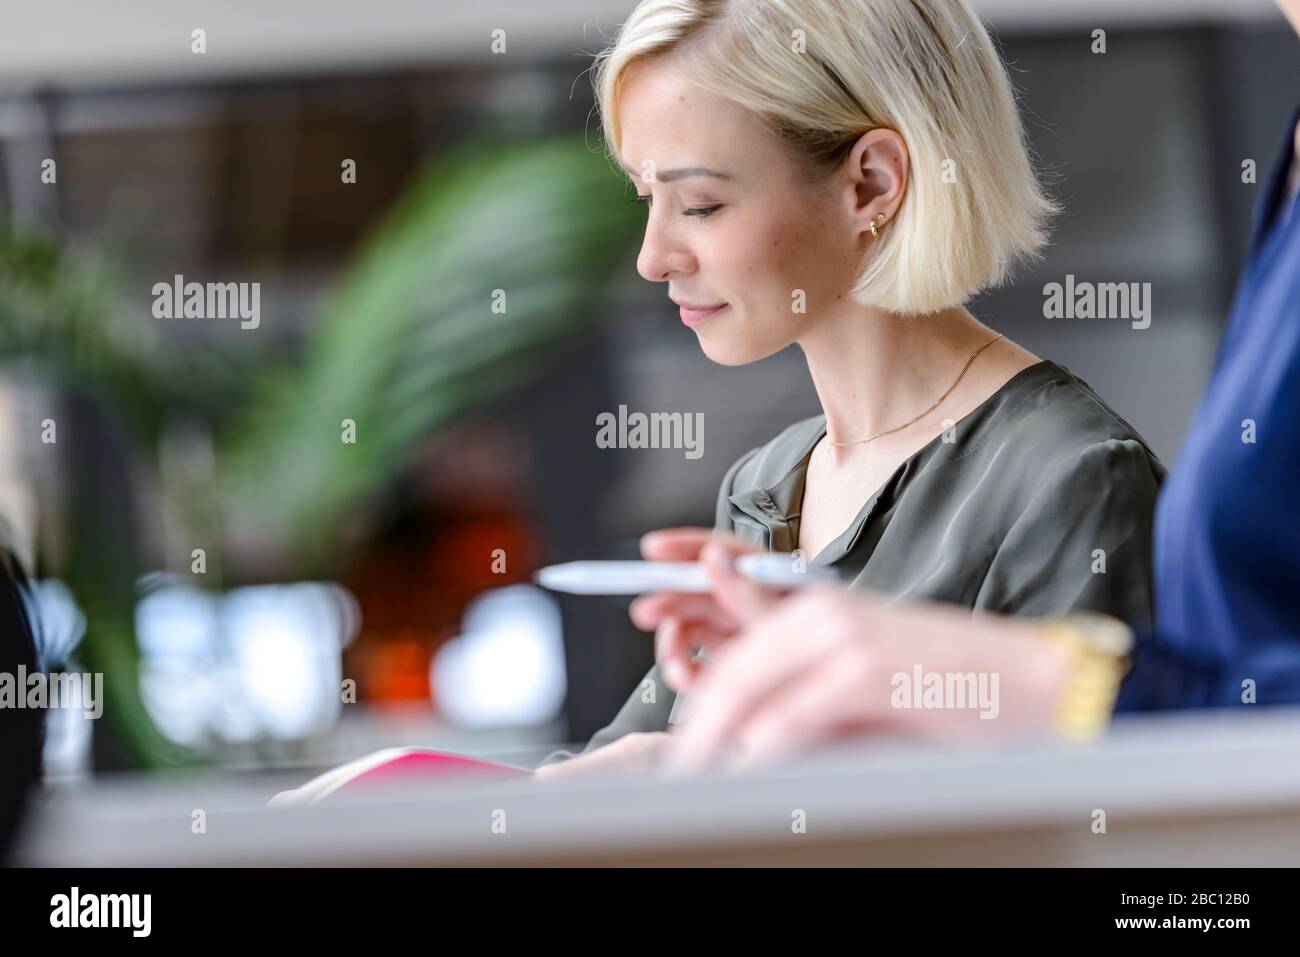 Attentive businesswoman sitting meeting, listening focussed Stock Photo